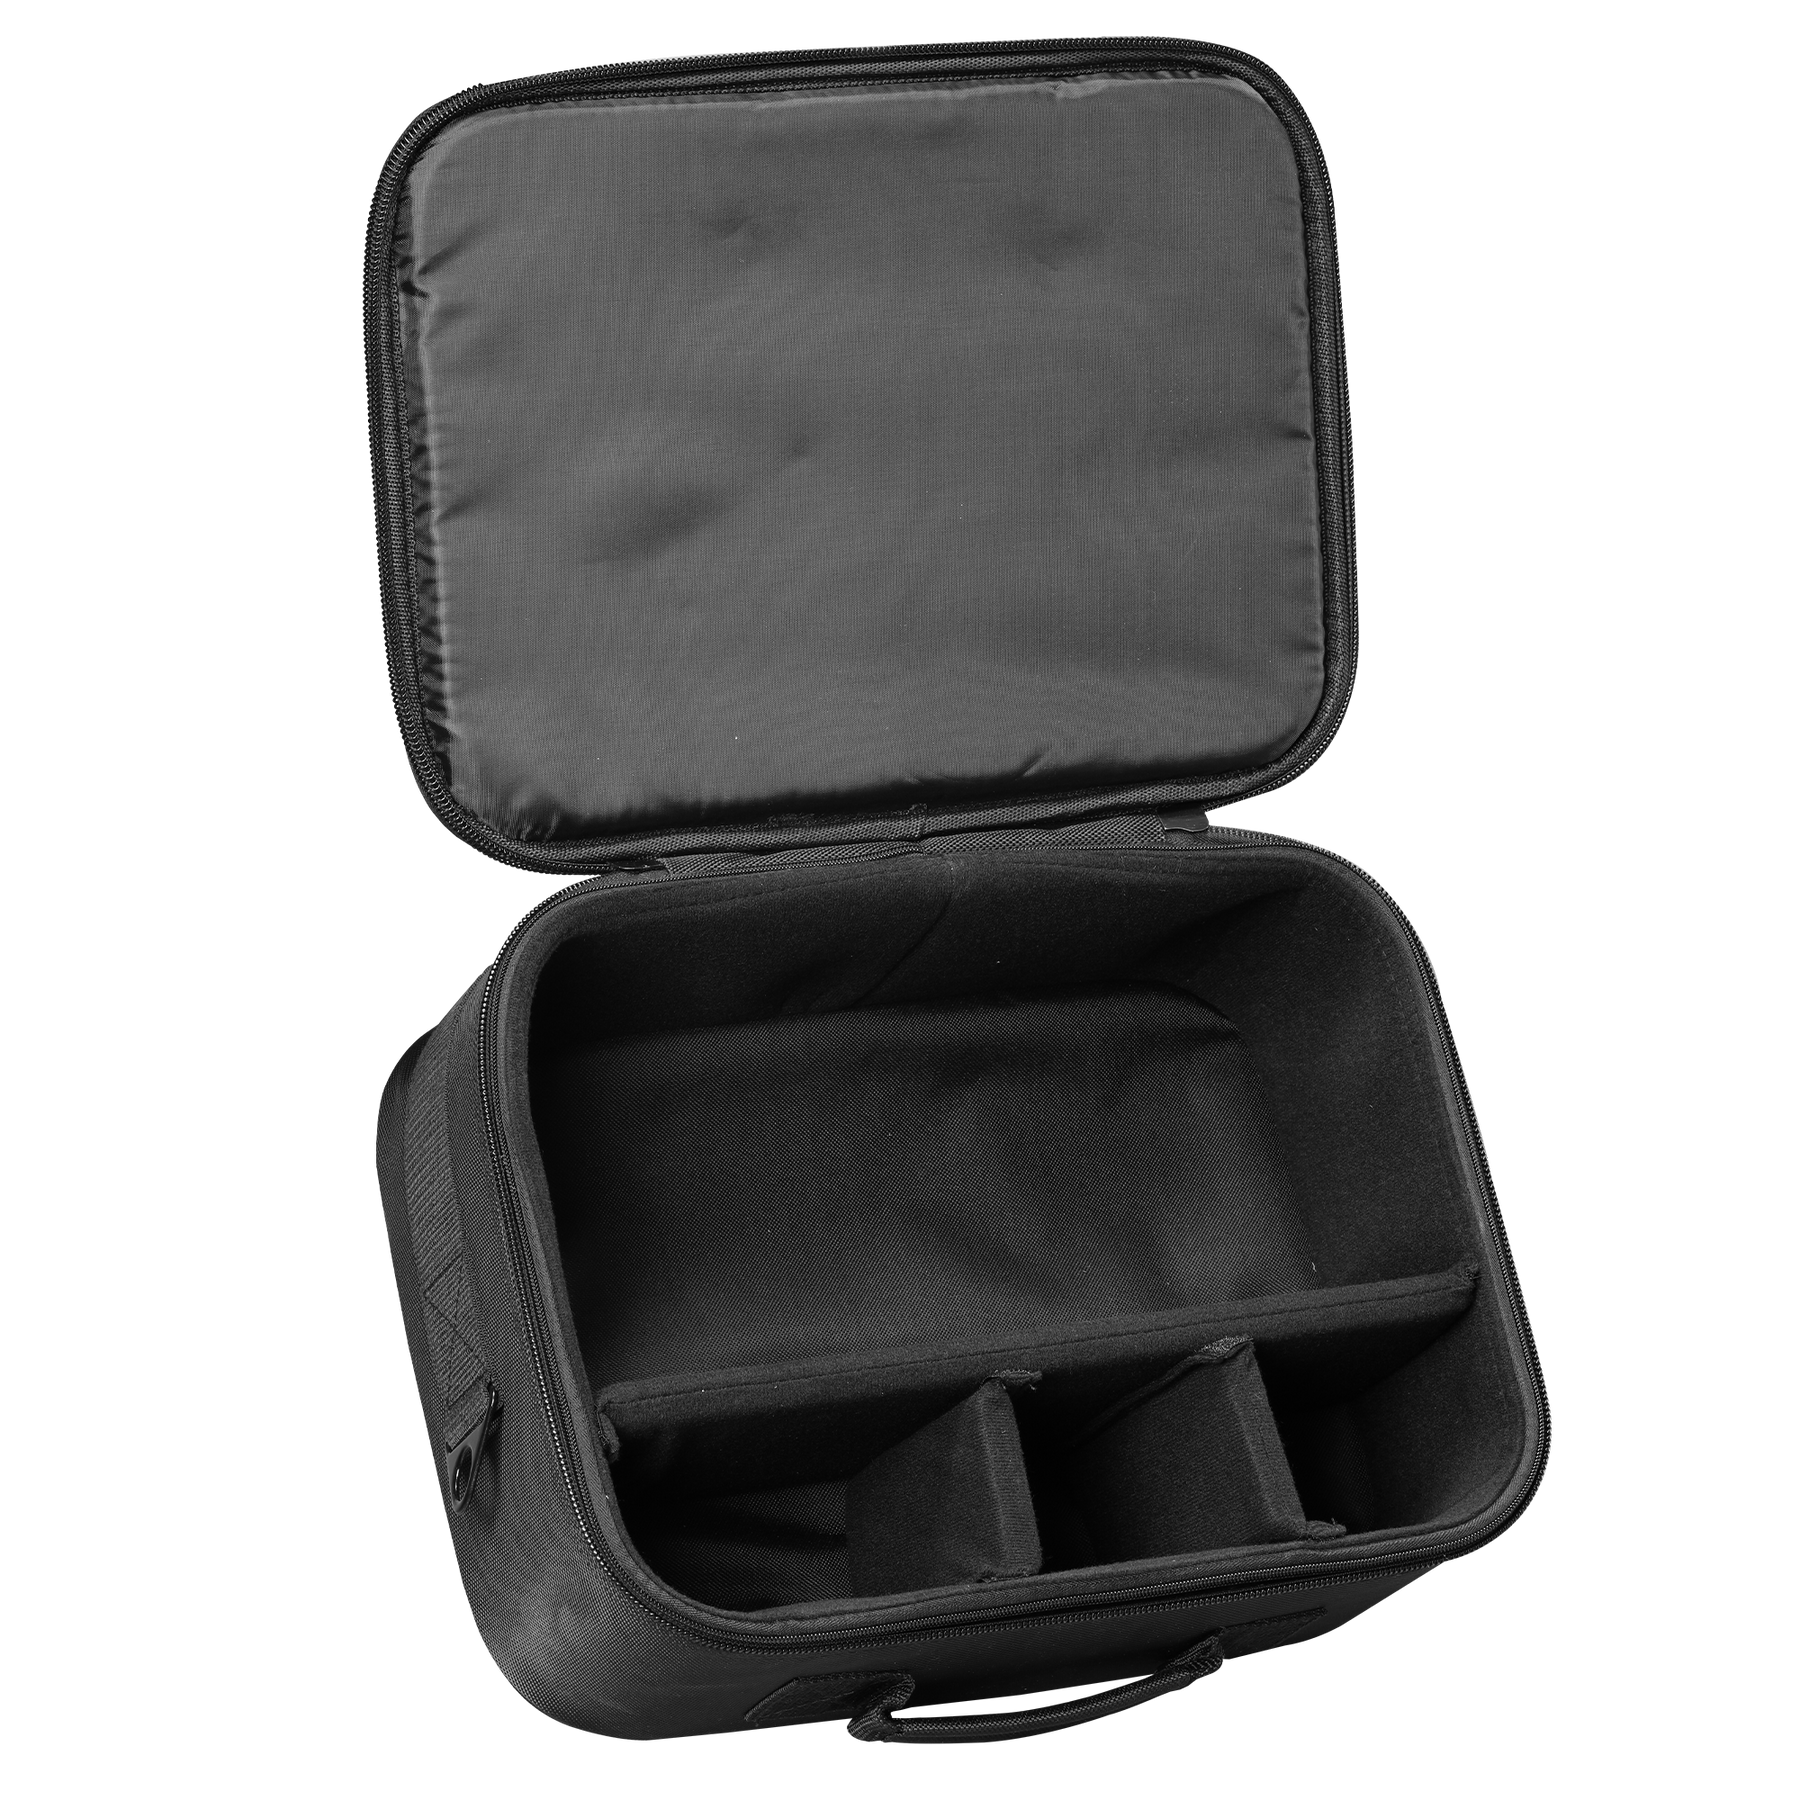 Bag for HD-610 Pro